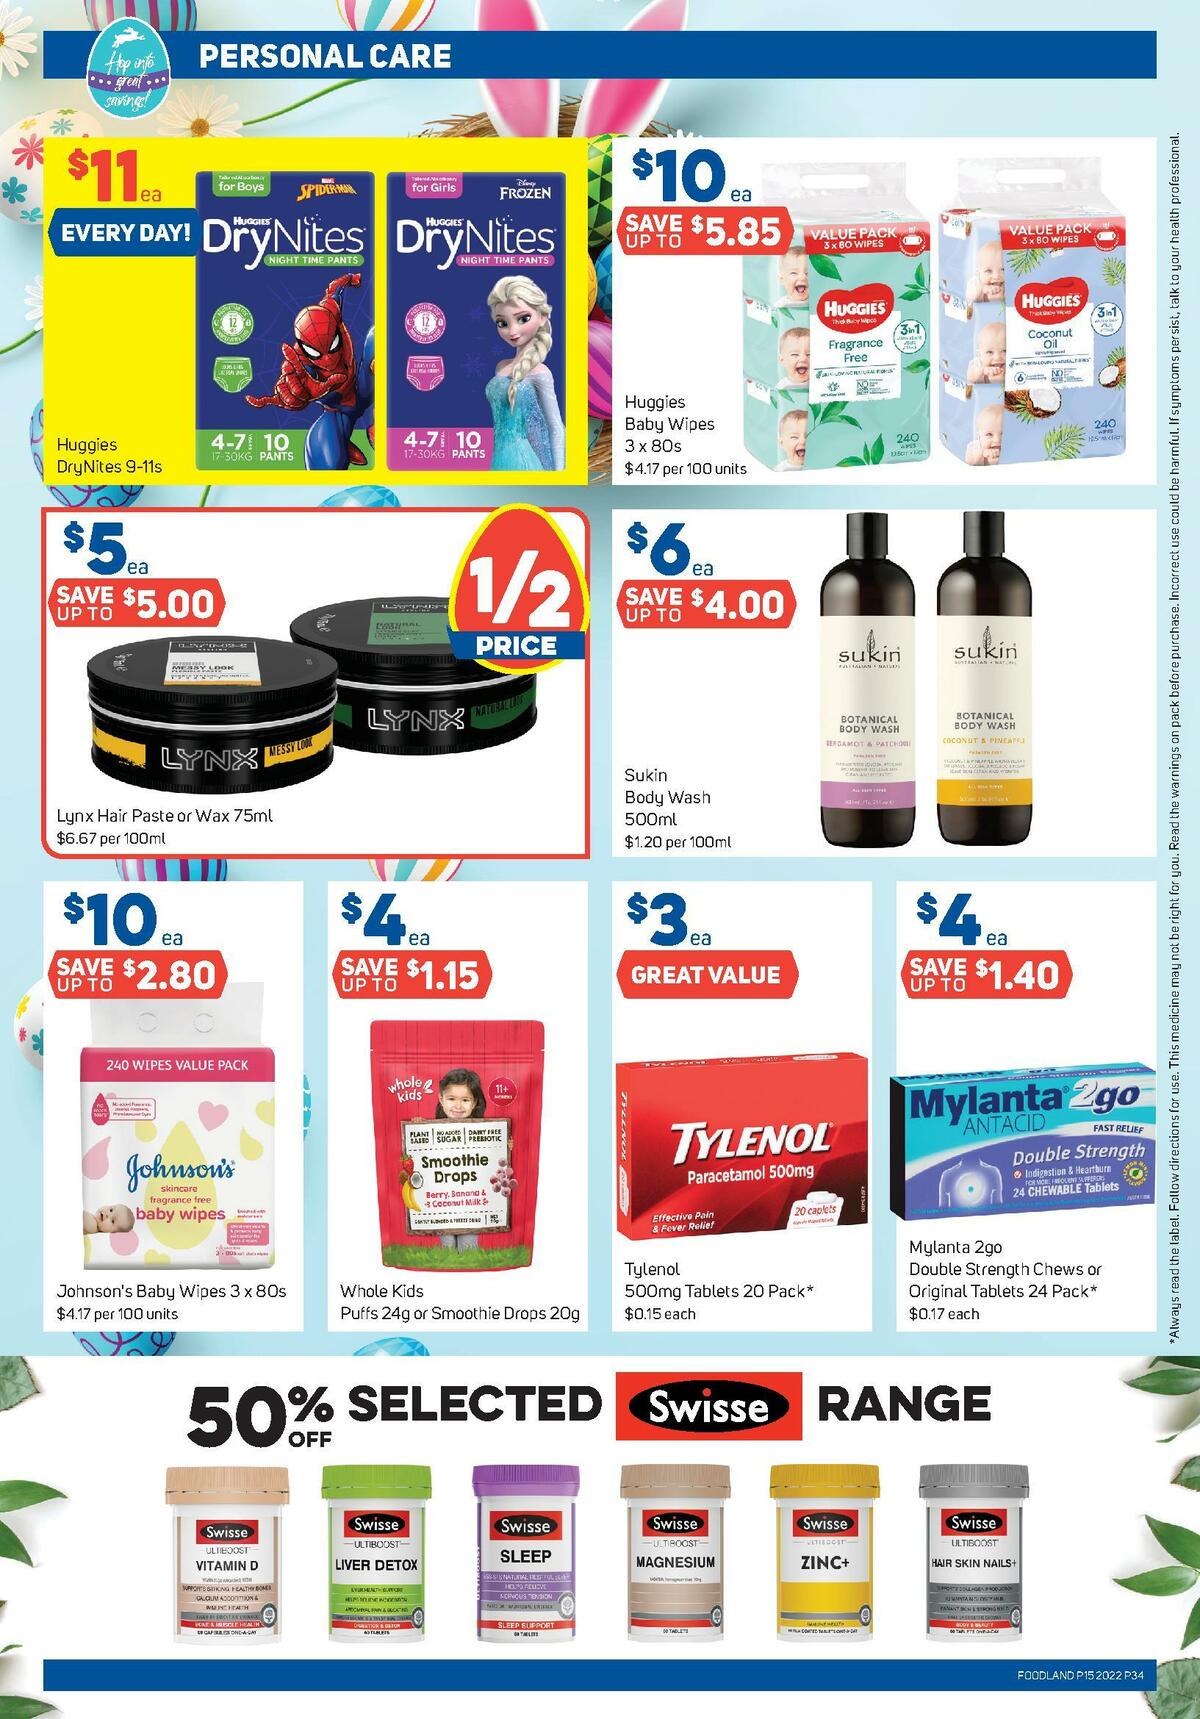 Foodland Catalogues from 13 April